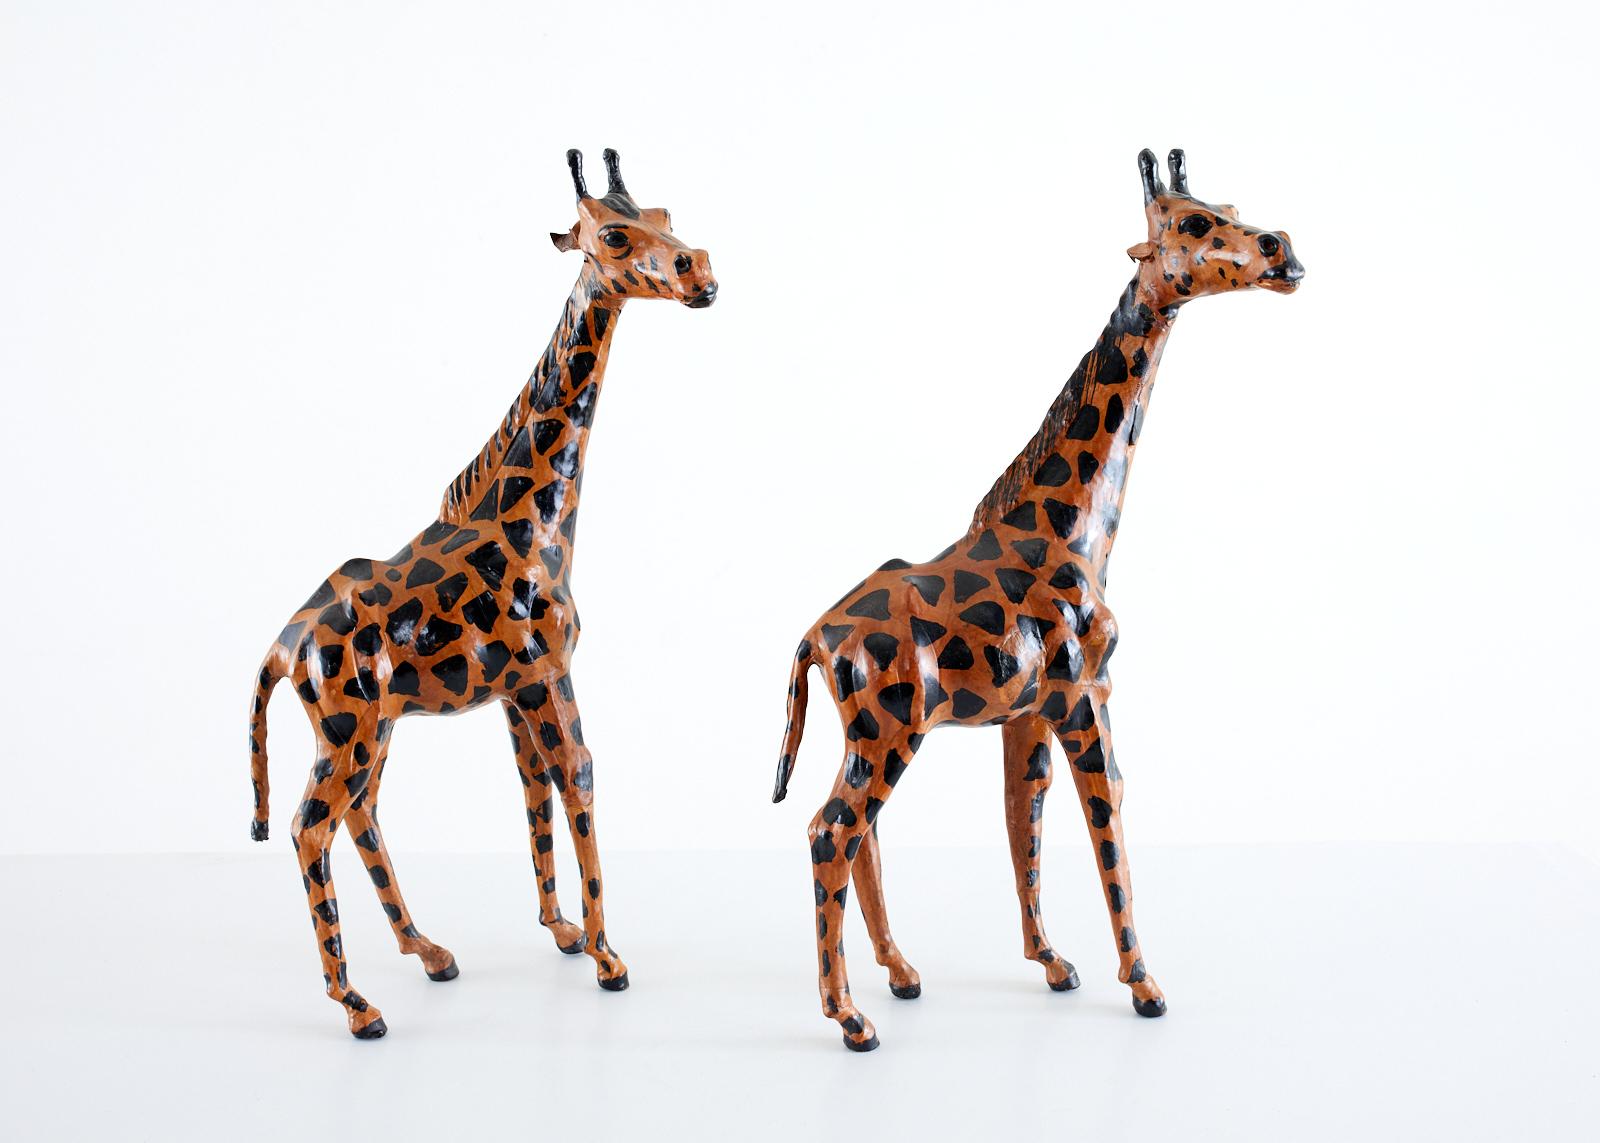 Charming pair of hand painted leather giraffe sculptures featuring a geometric pattern body and life like heads. Beautifully hand-crafted with expressive faces.